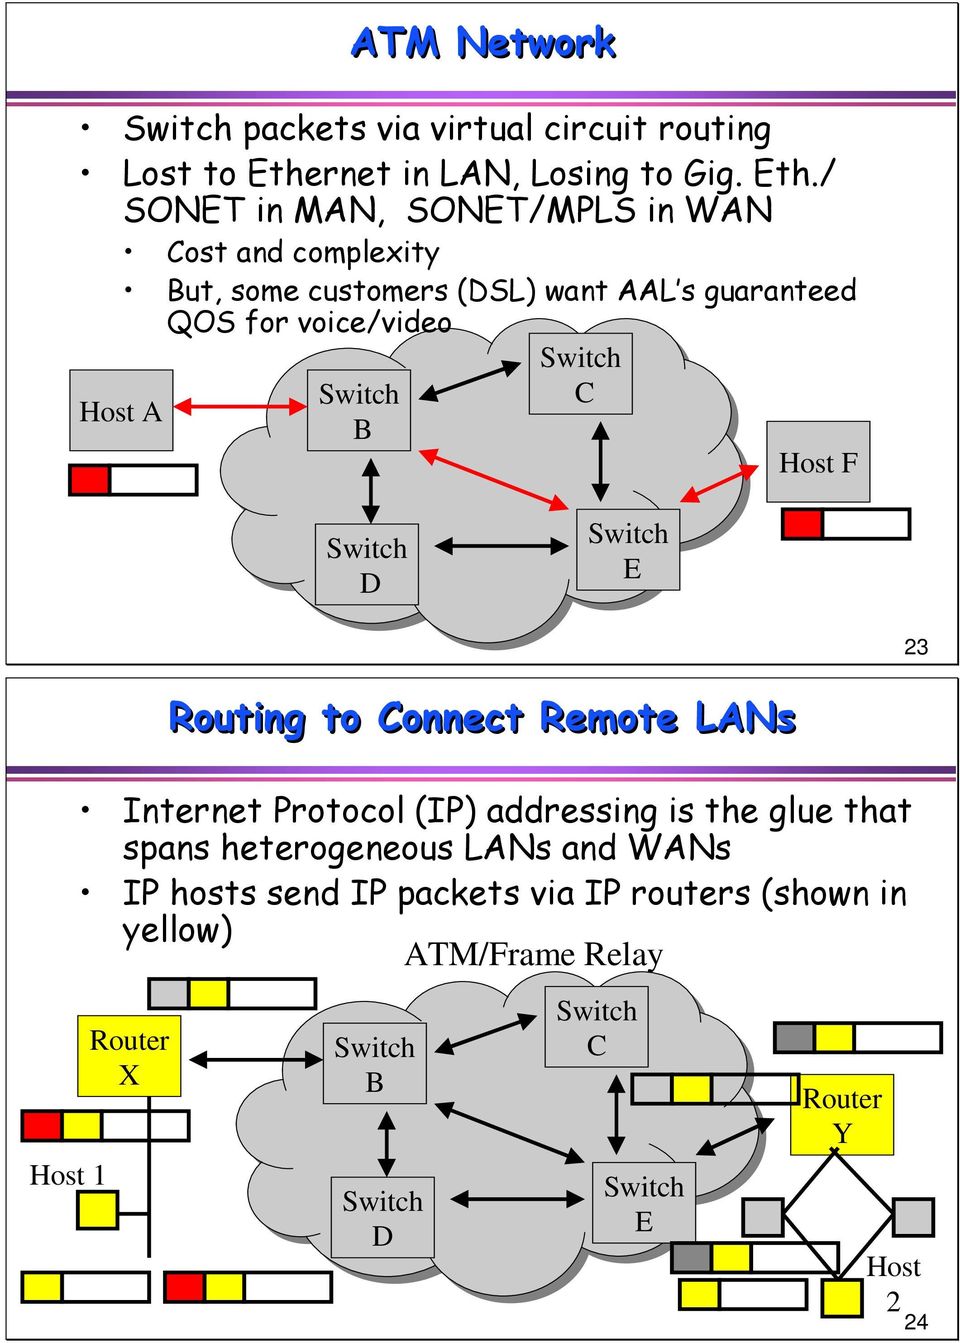 / in MAN, /MPLS in WAN Cost and complexity But, some customers (DSL) want AAL s guaranteed Host A QOS for